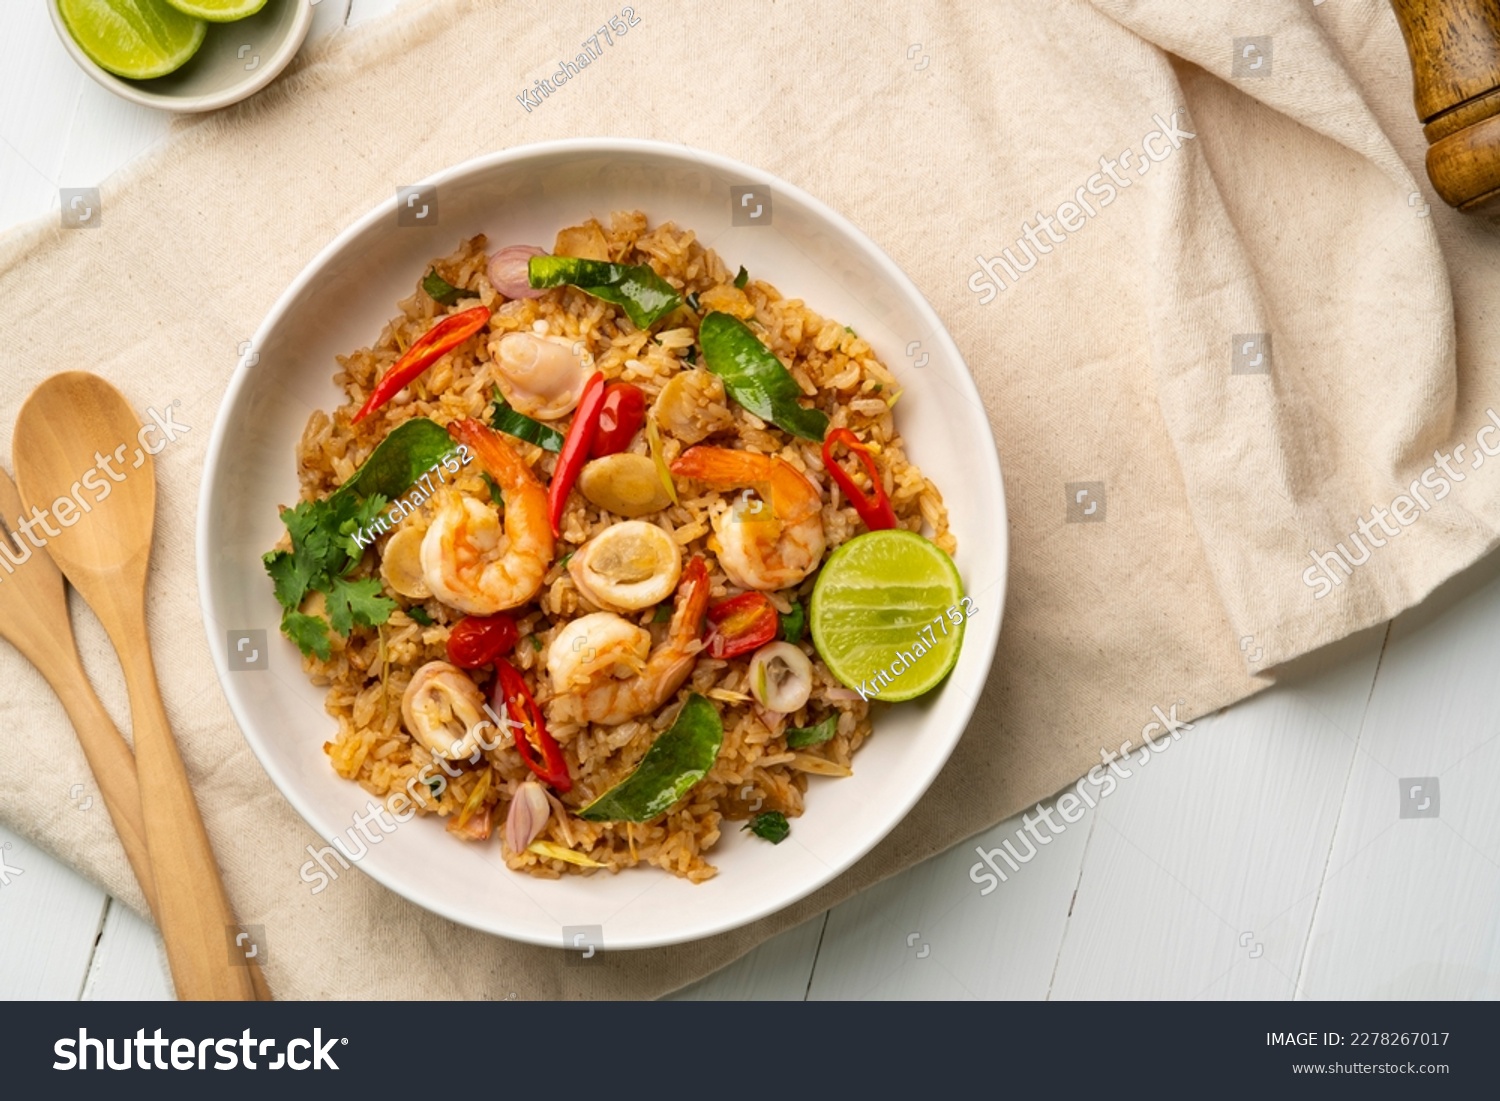 Seafood Tom Yum Fried Rice,Stir fried rice with shrimp and squid with chilli sauce on white plate.Top view #2278267017